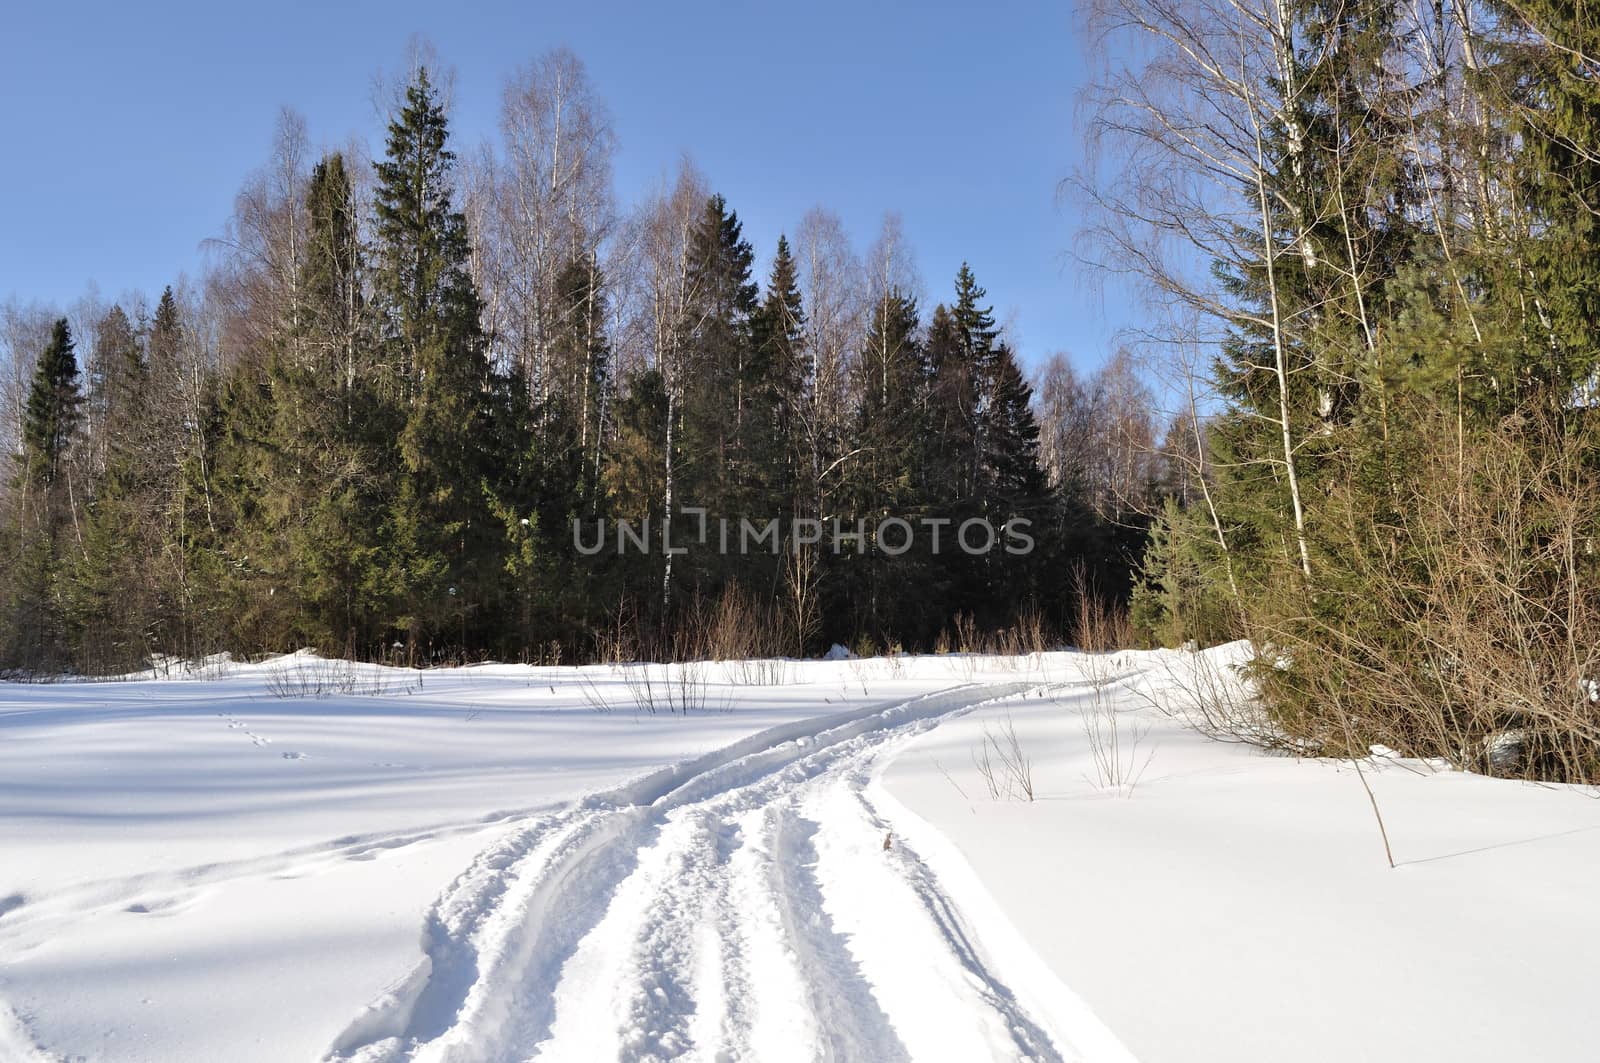 Ski track in winter forest by wander